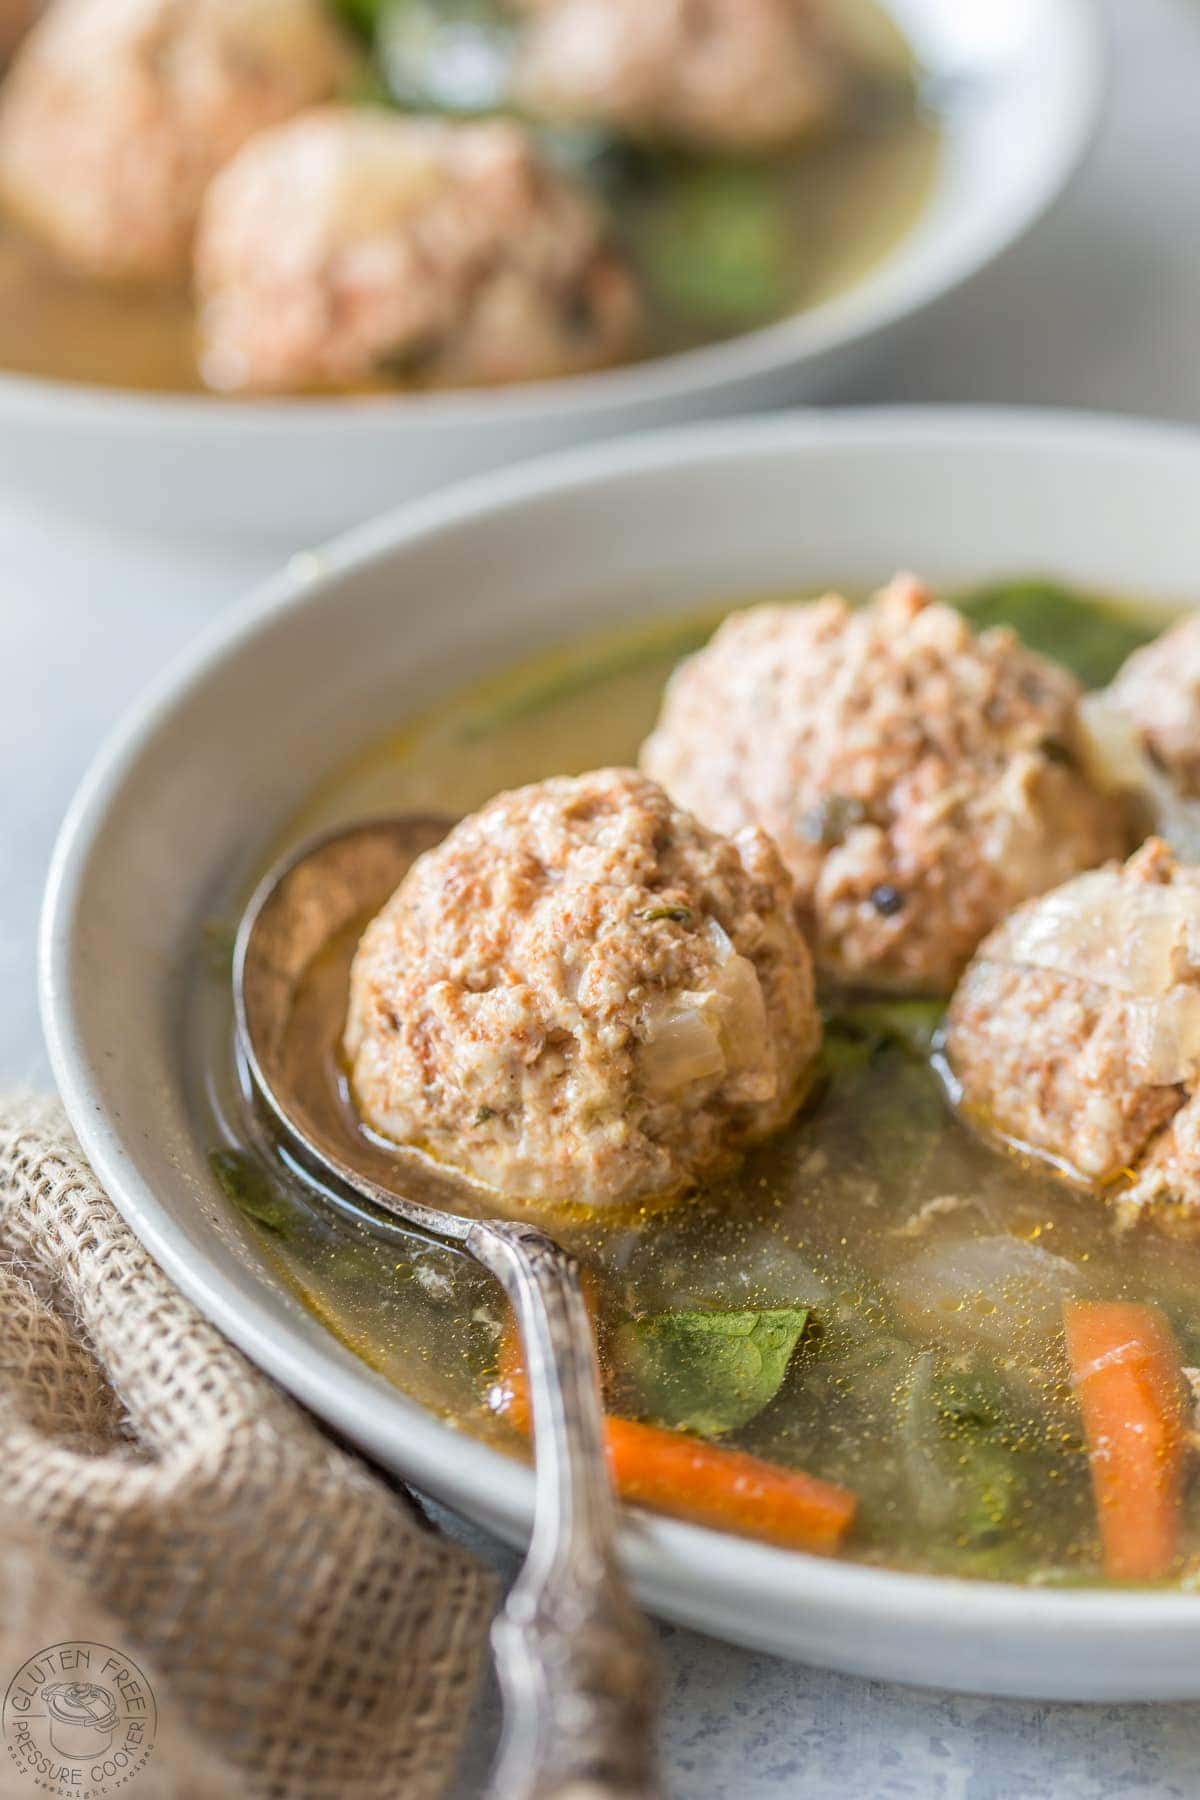 Pressure Cooker Italian Wedding Soup, this recipe is gluten free, paleo, Whole30, low carb and healthy, and is perfect to make in your Instant Pot or any other electric pressure cooker!